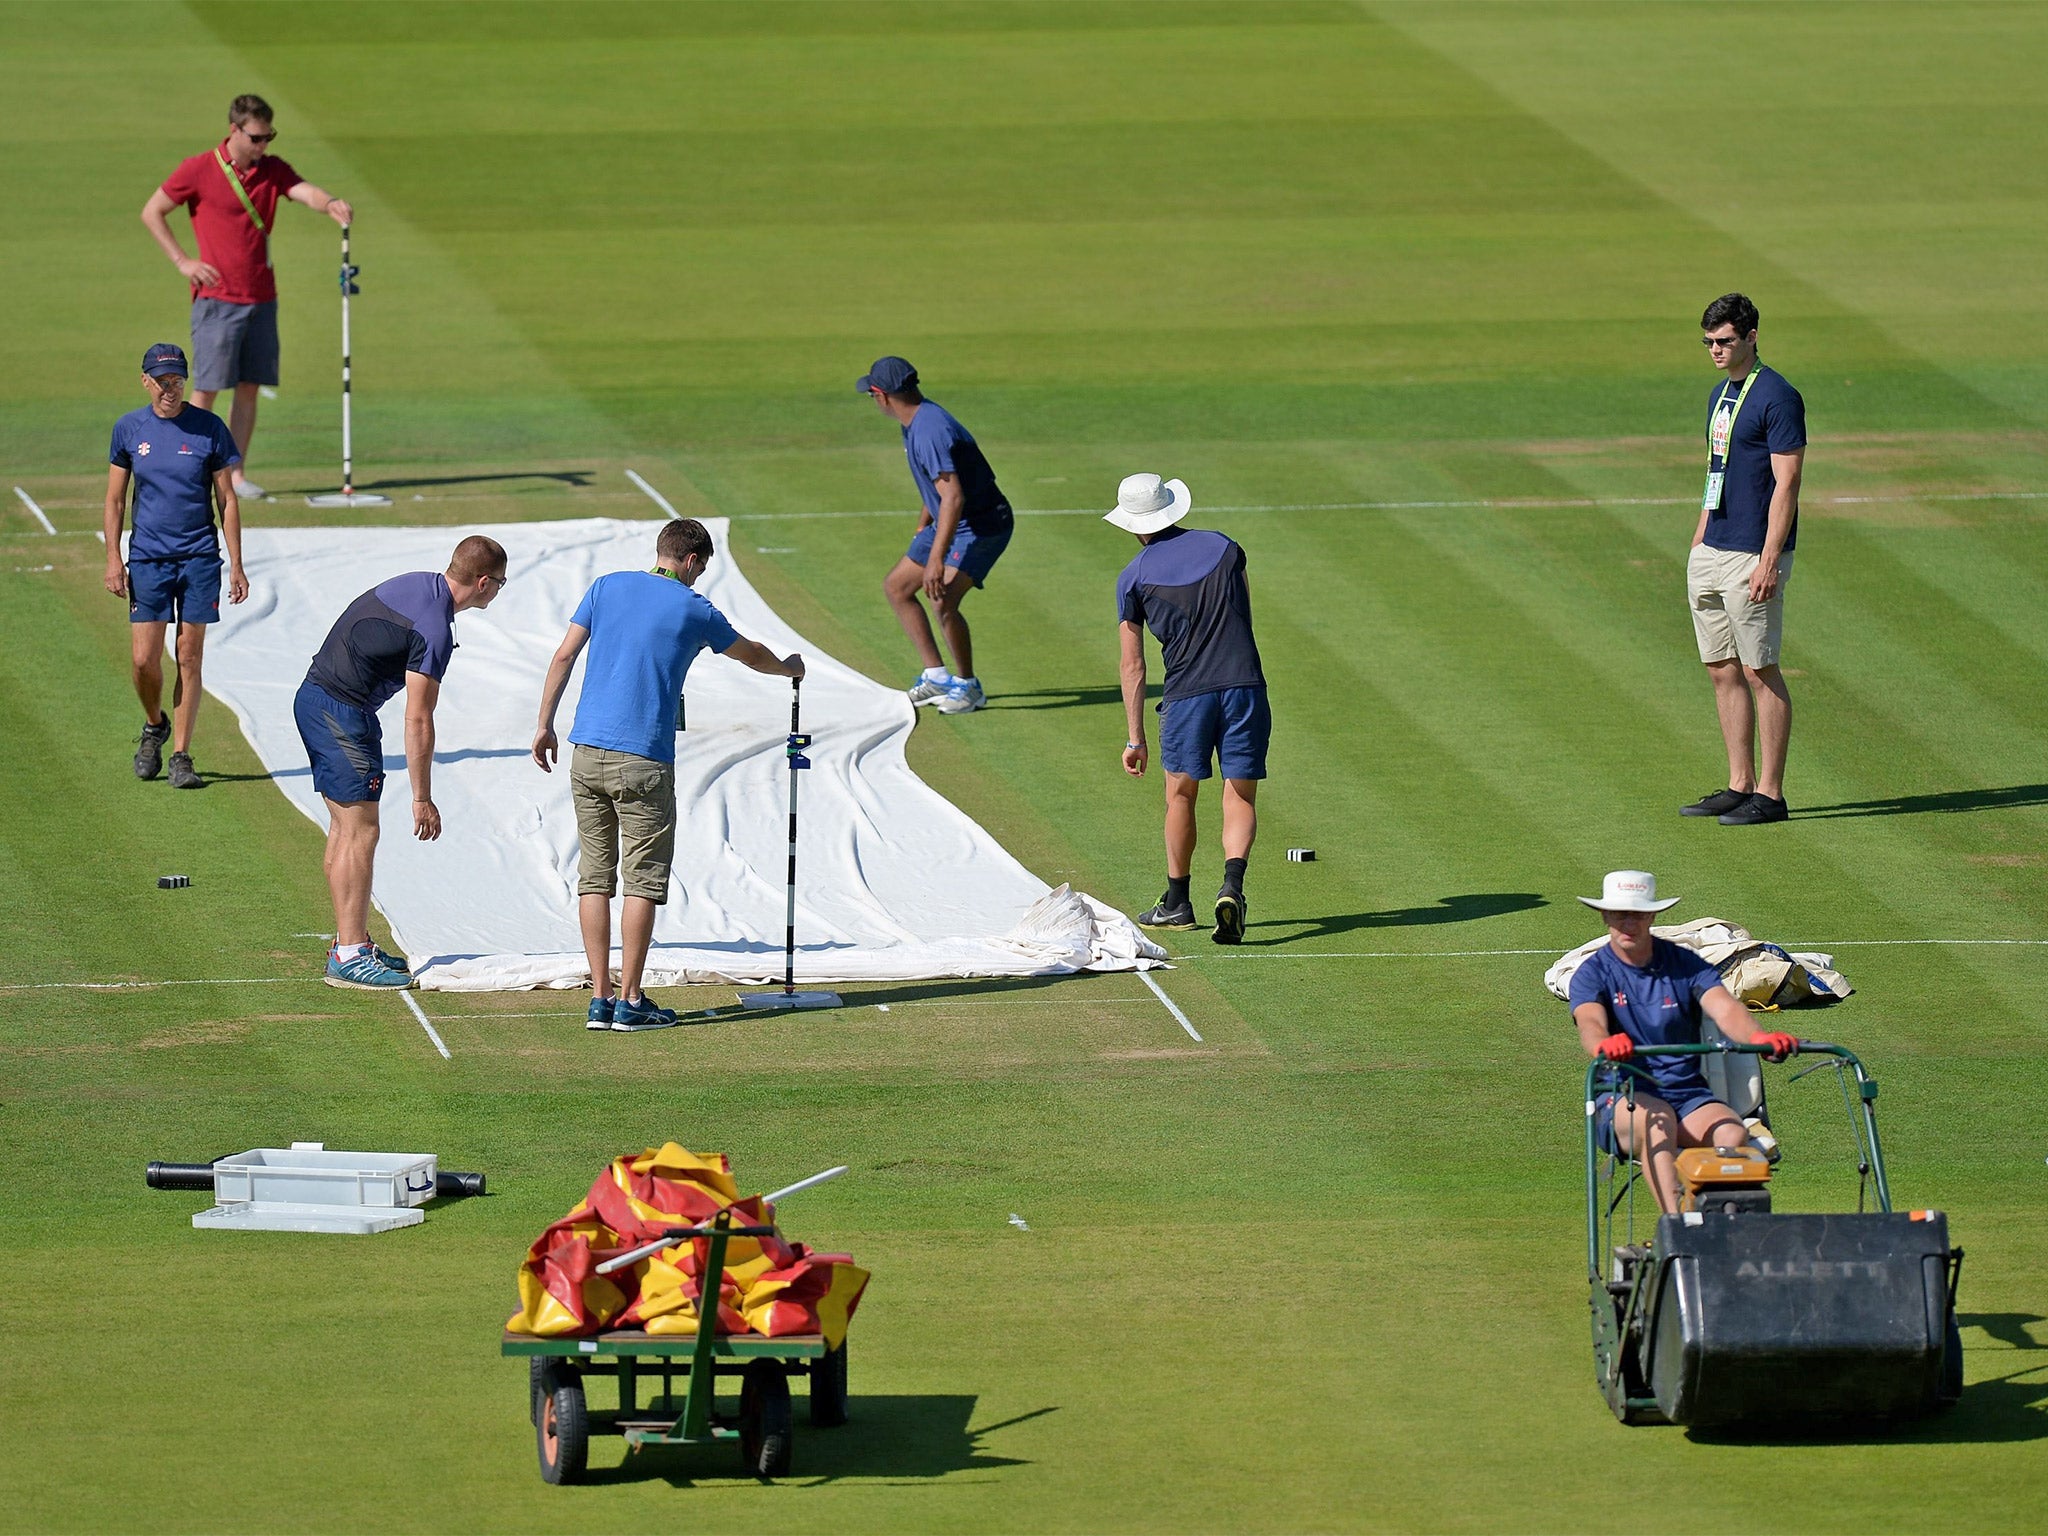 Ground staff prepare the Test wicket at Lord's